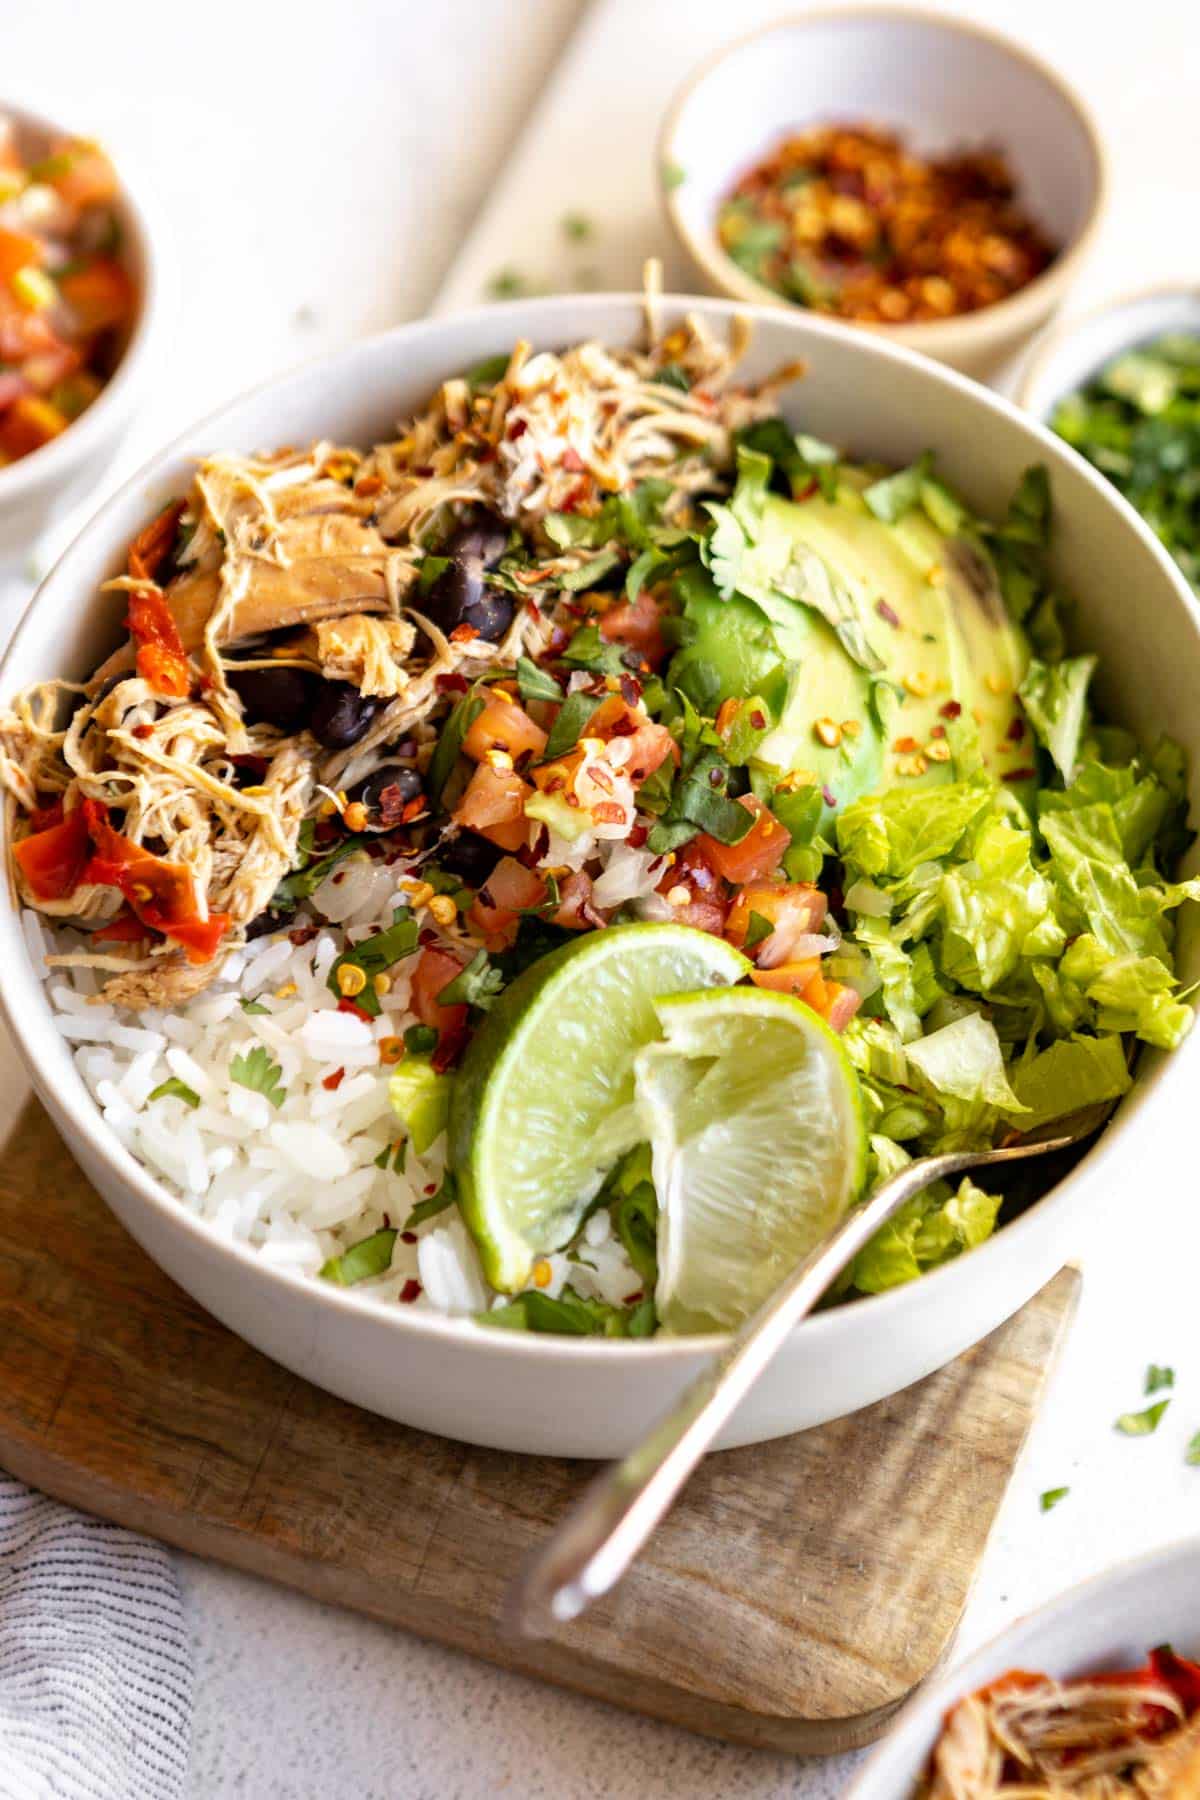 Make taco night easy night with these Crockpot Chicken Taco Bowls! Made naturally gluten free with homemade low sodium taco seasoning and layered with fresh vegetables, this low calorie dinner is one everyone will love especially the cook! 